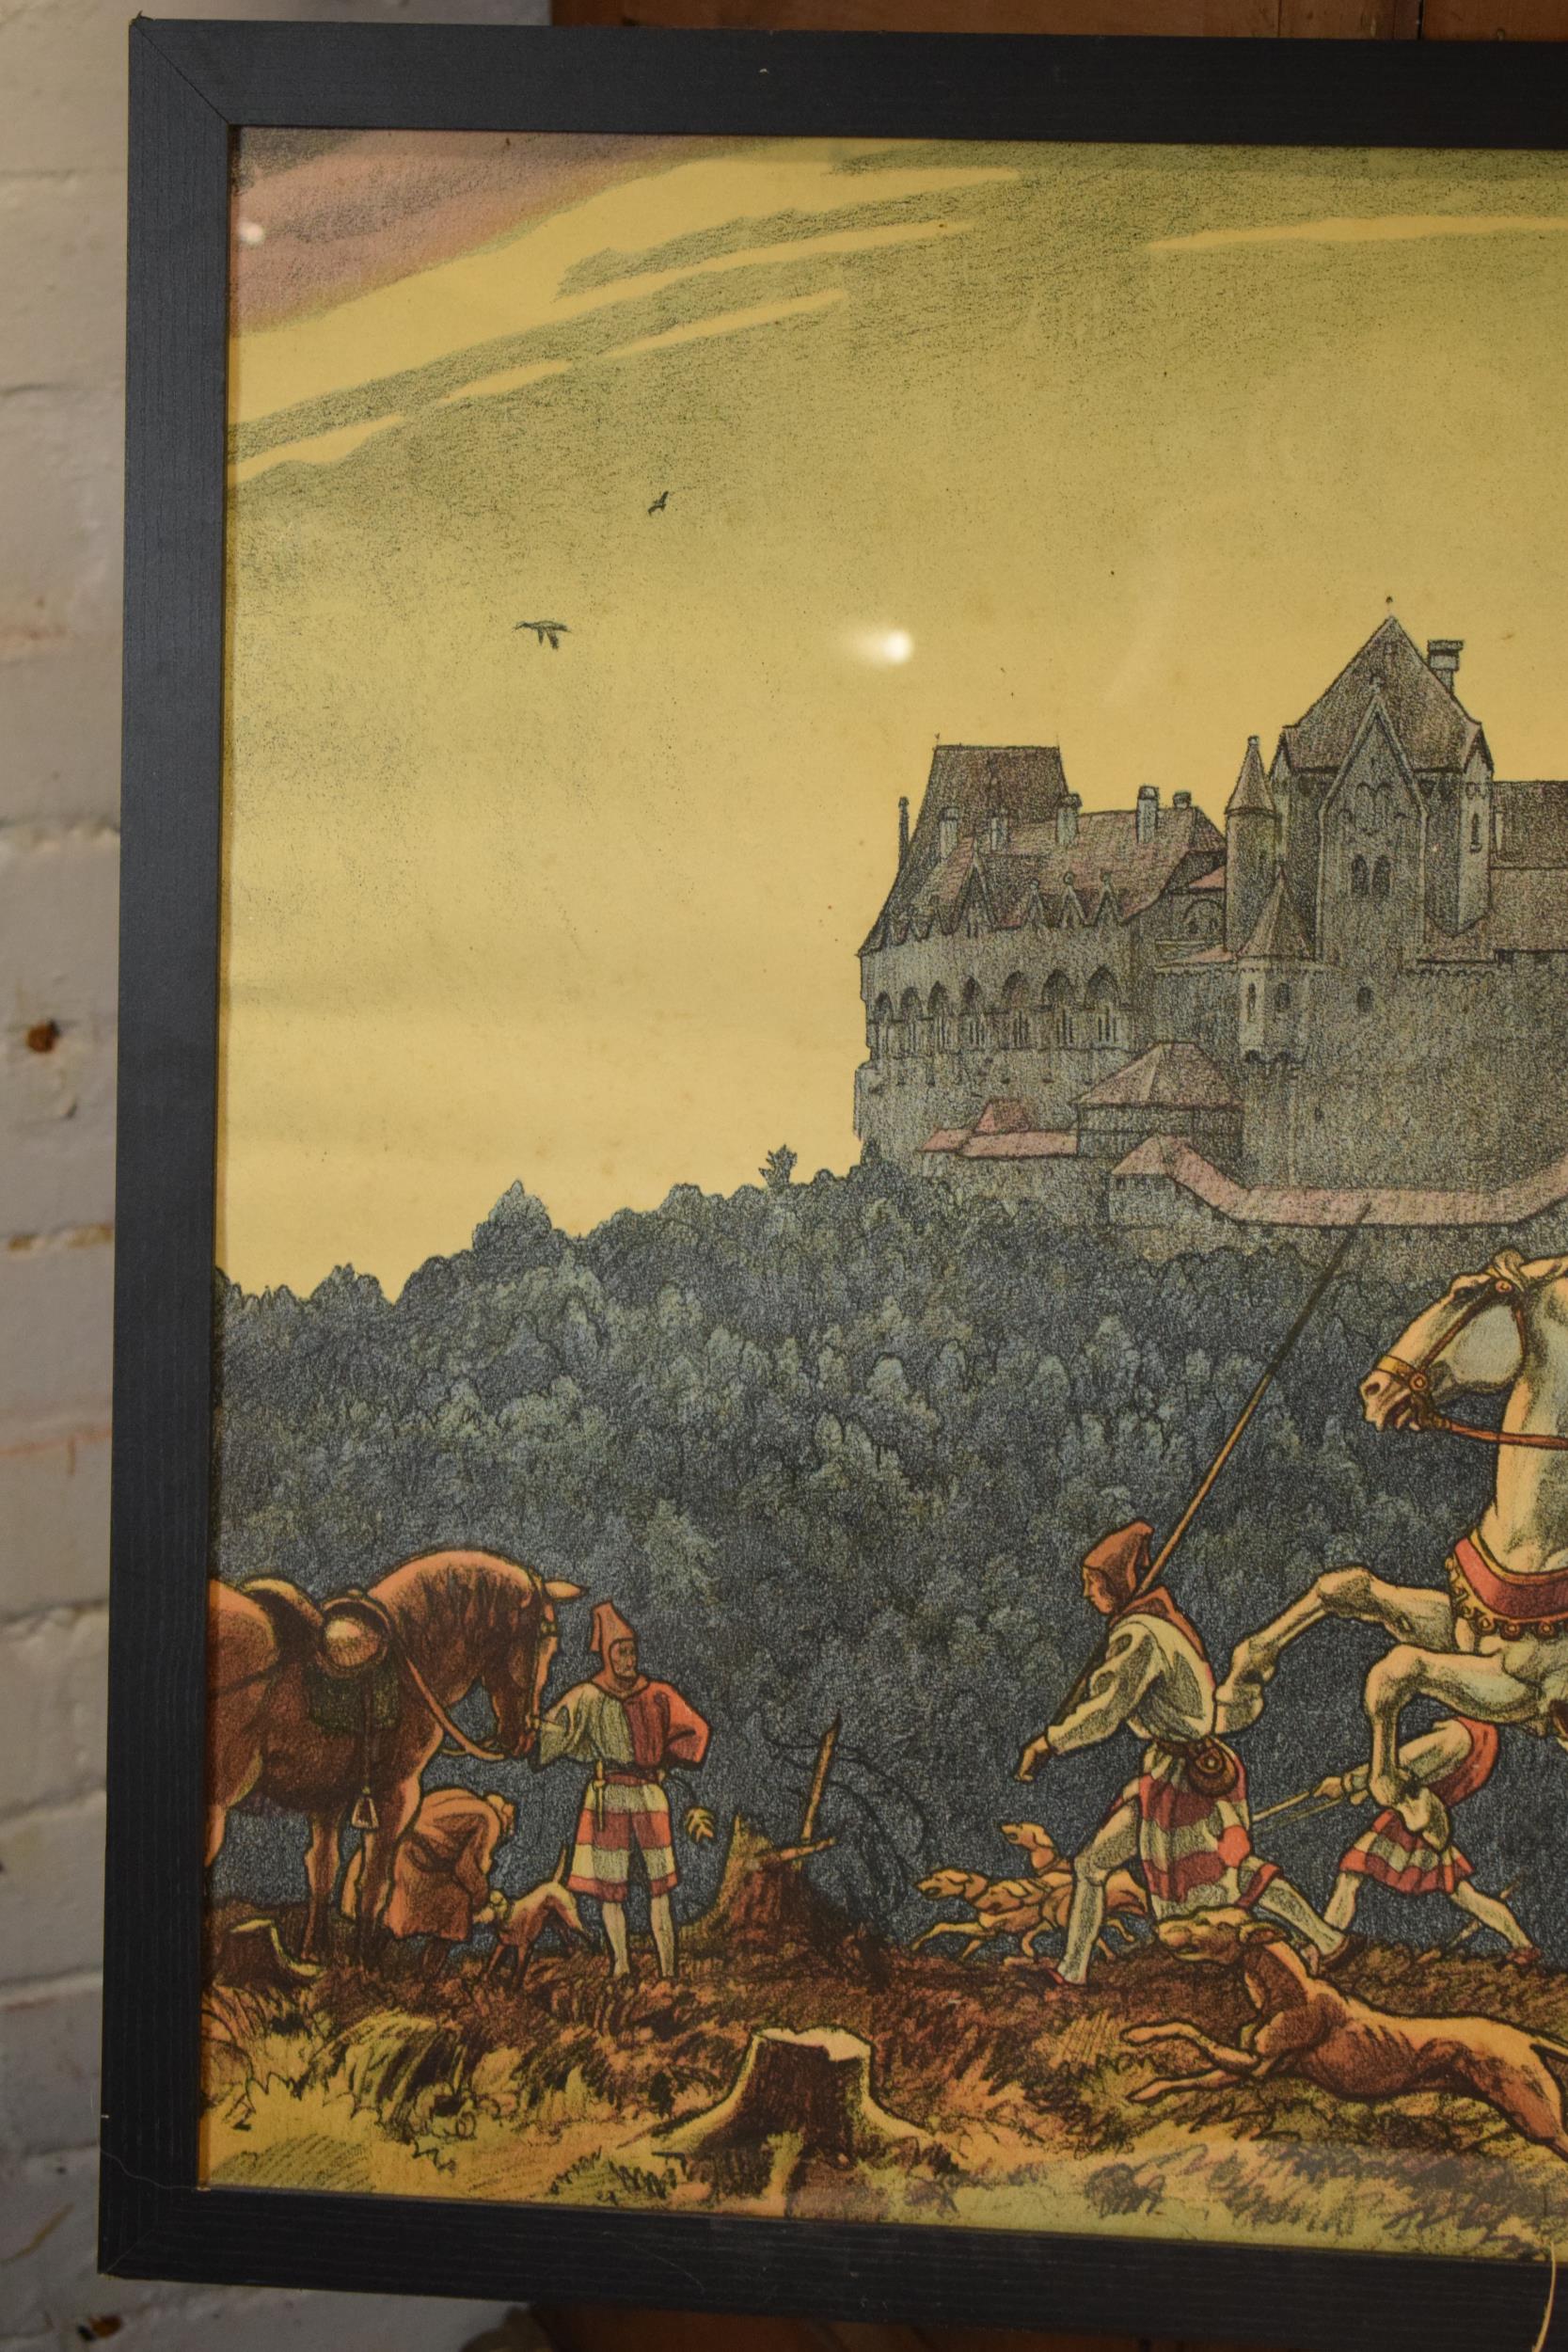 Framed print in the form of crusaders / knights with a castle in the background above a forest (in - Image 6 of 10